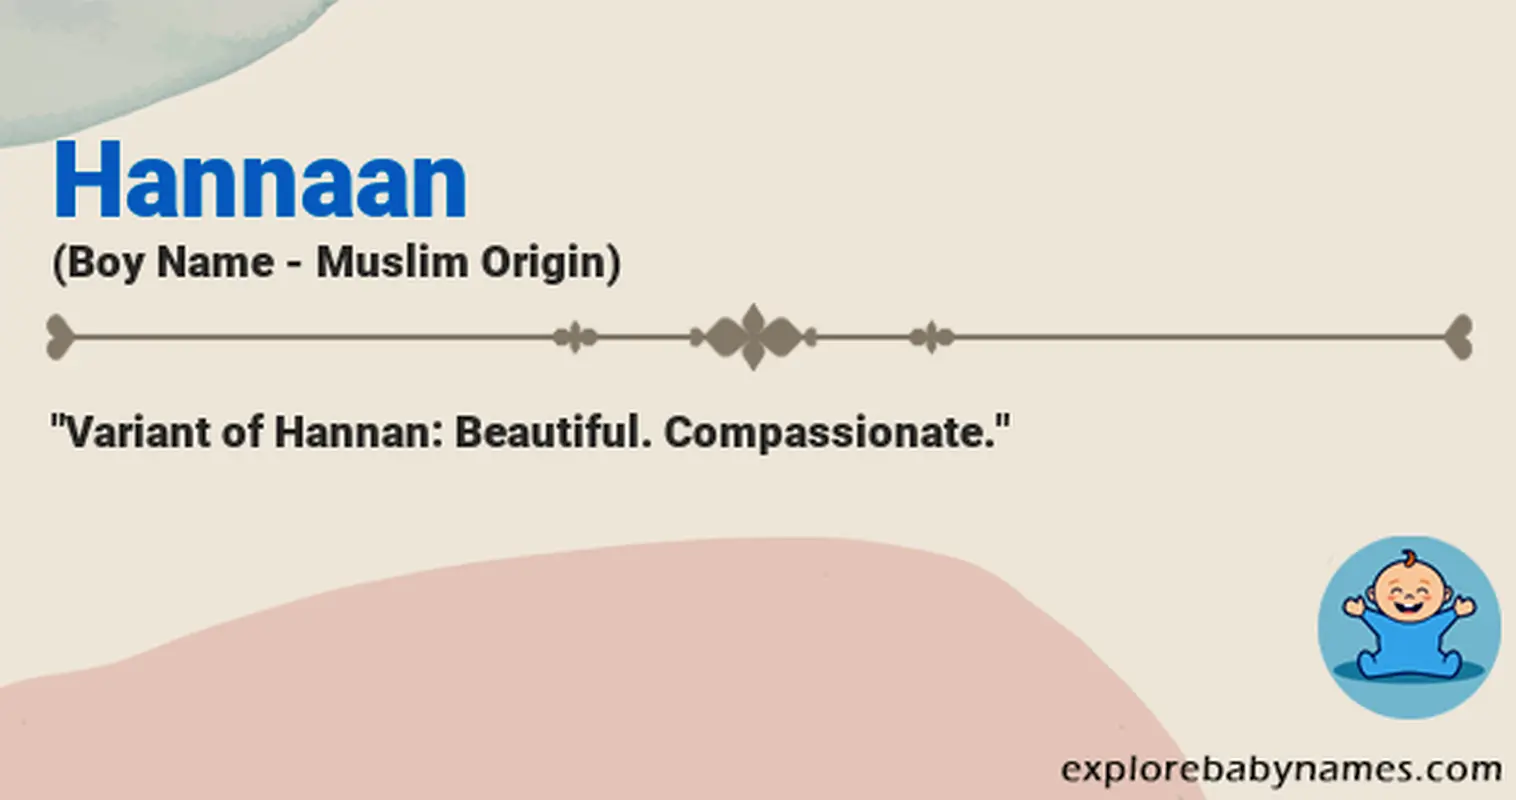 Meaning of Hannaan